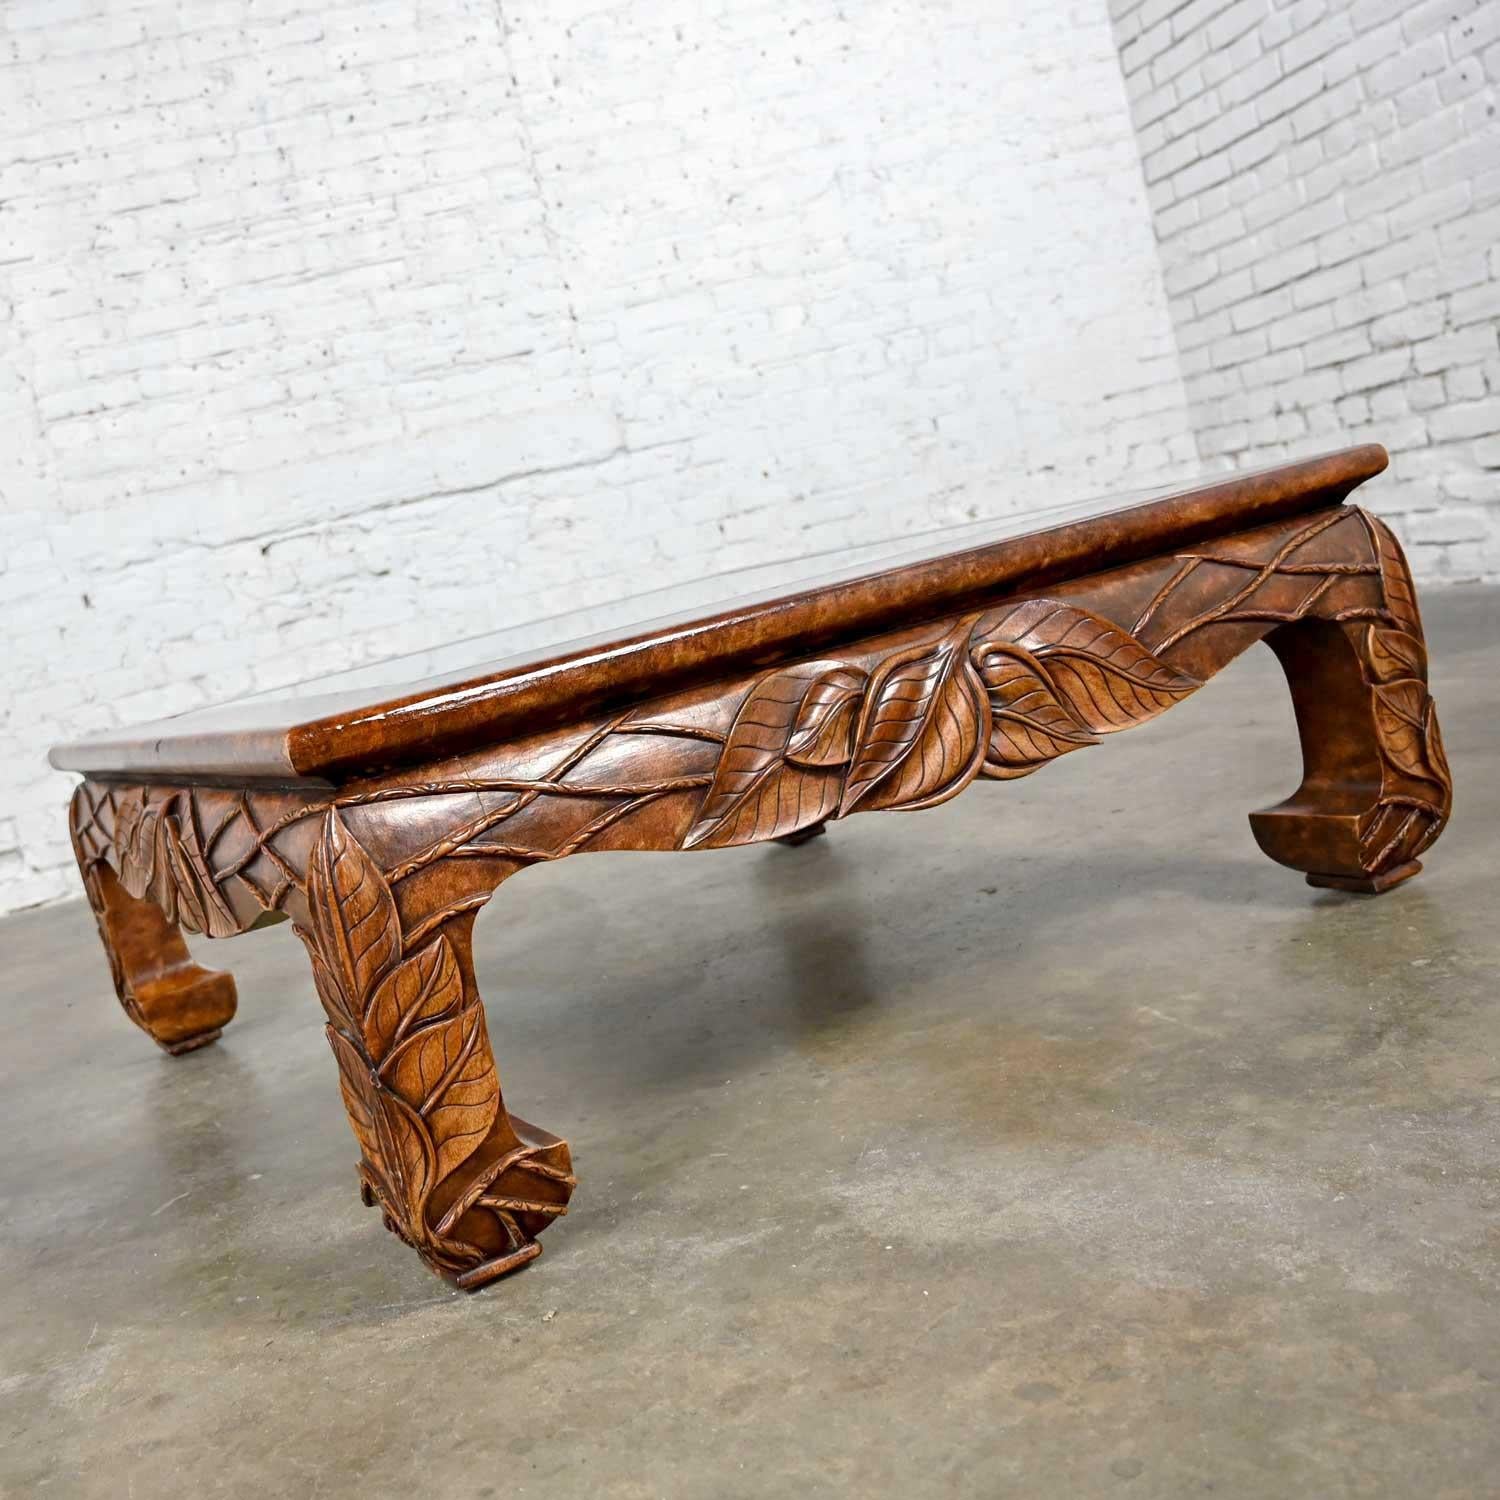 Phenomenal vintage chinoiserie Ming style chow leg coffee table with carved designs and a beveled glass insert produced by Casa Bique Ltd. in the Philippines and attributed to Robert Marcius. Beautiful condition, keeping in mind that this is vintage